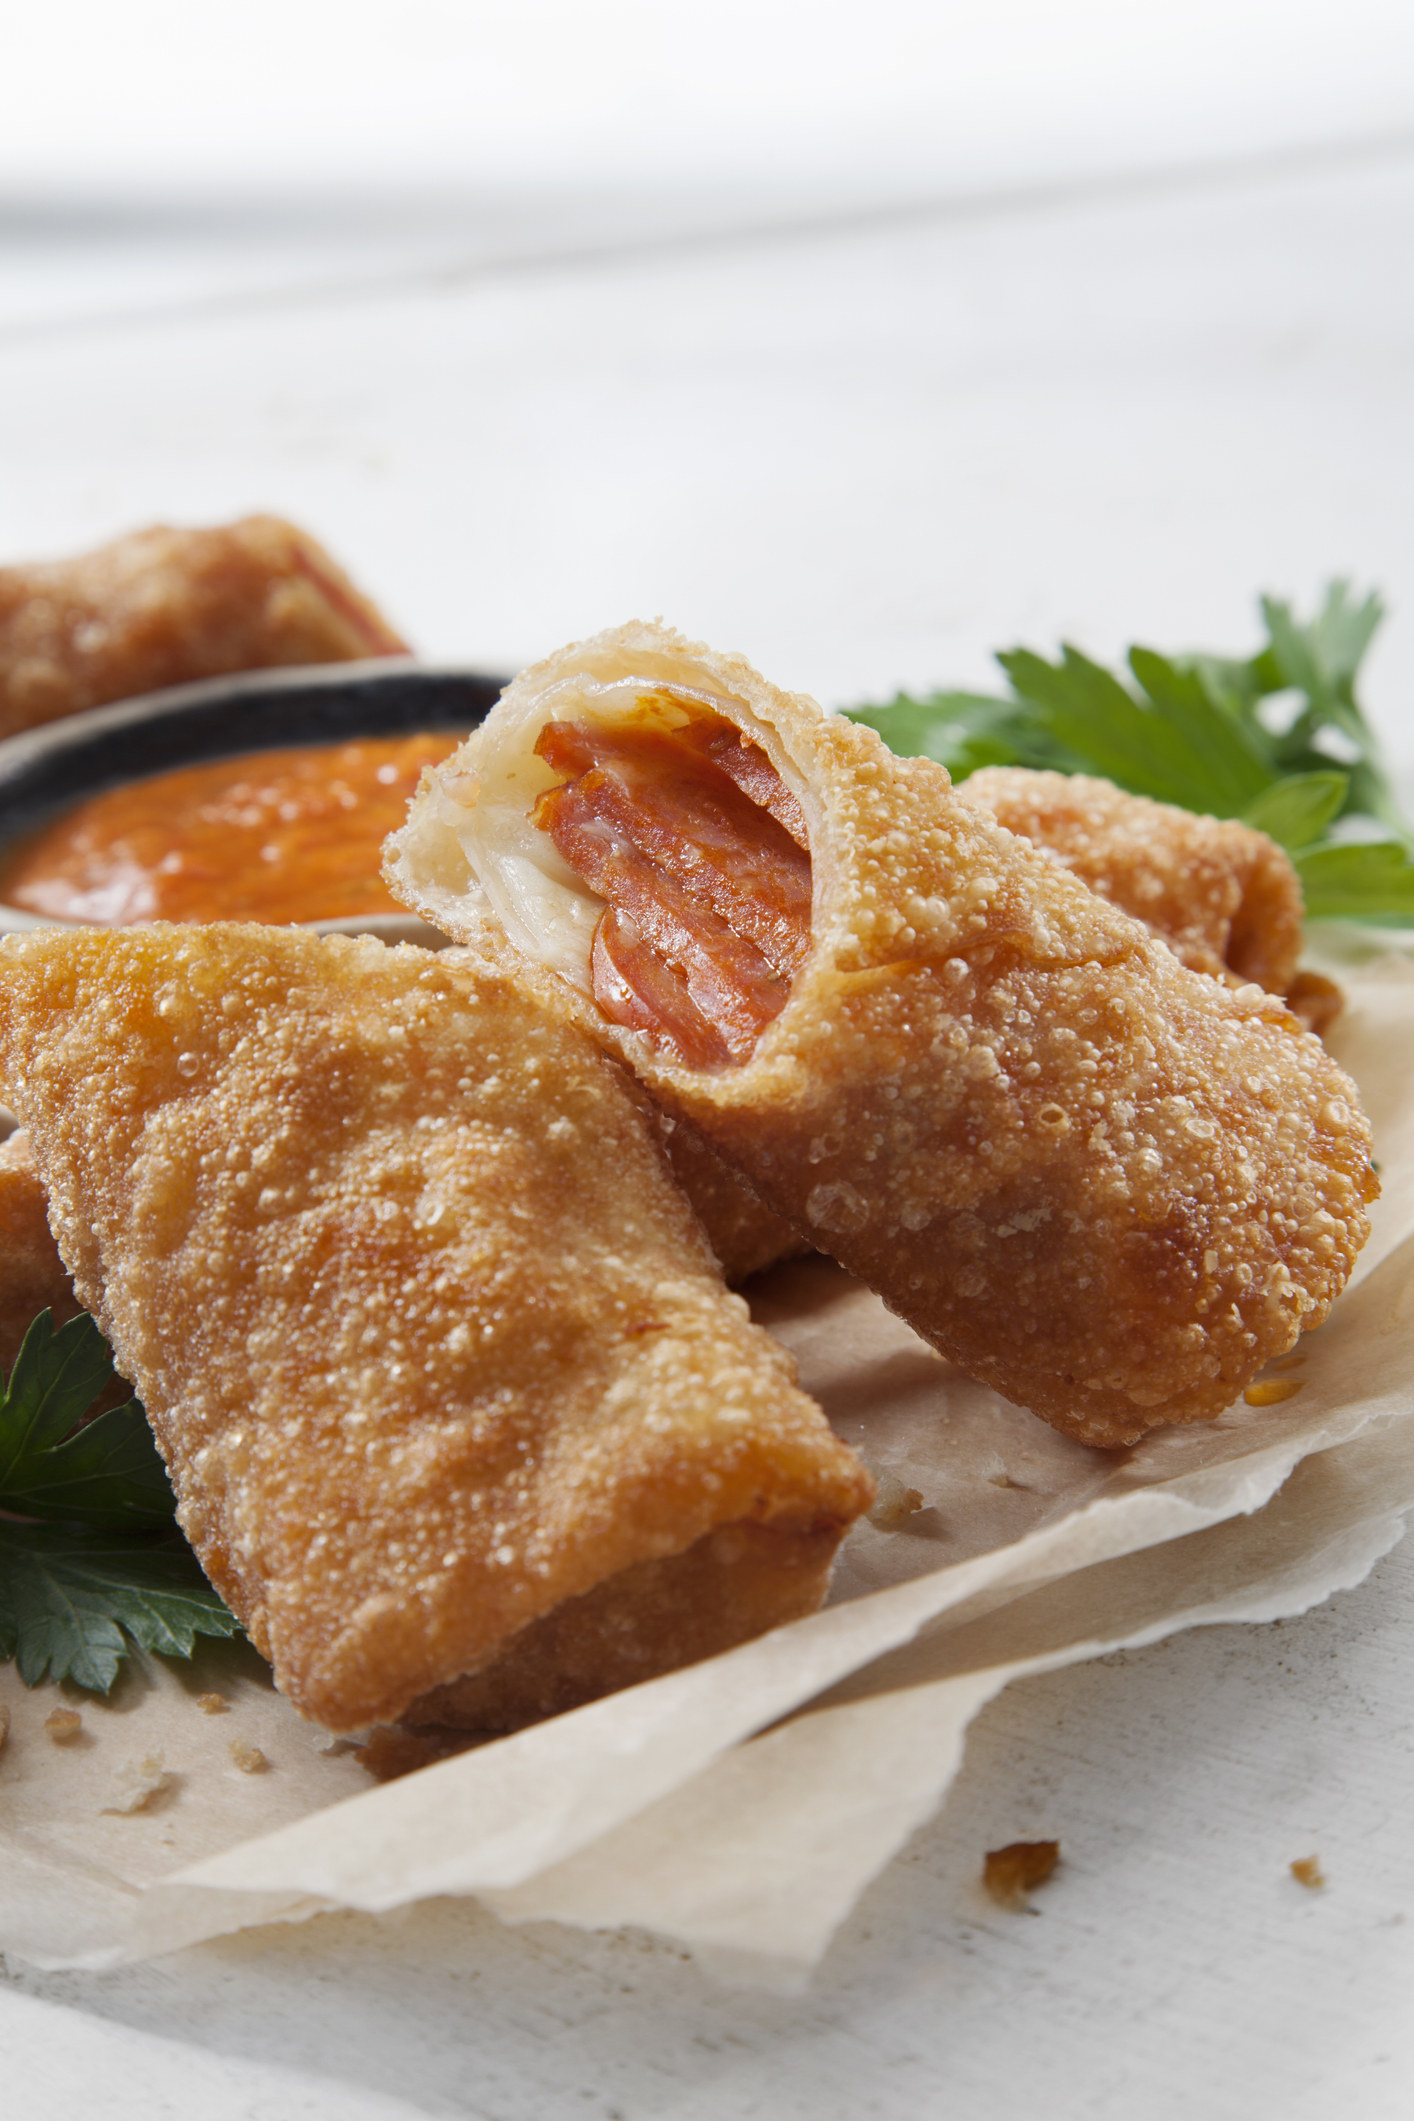 A pizza-filled egg roll.